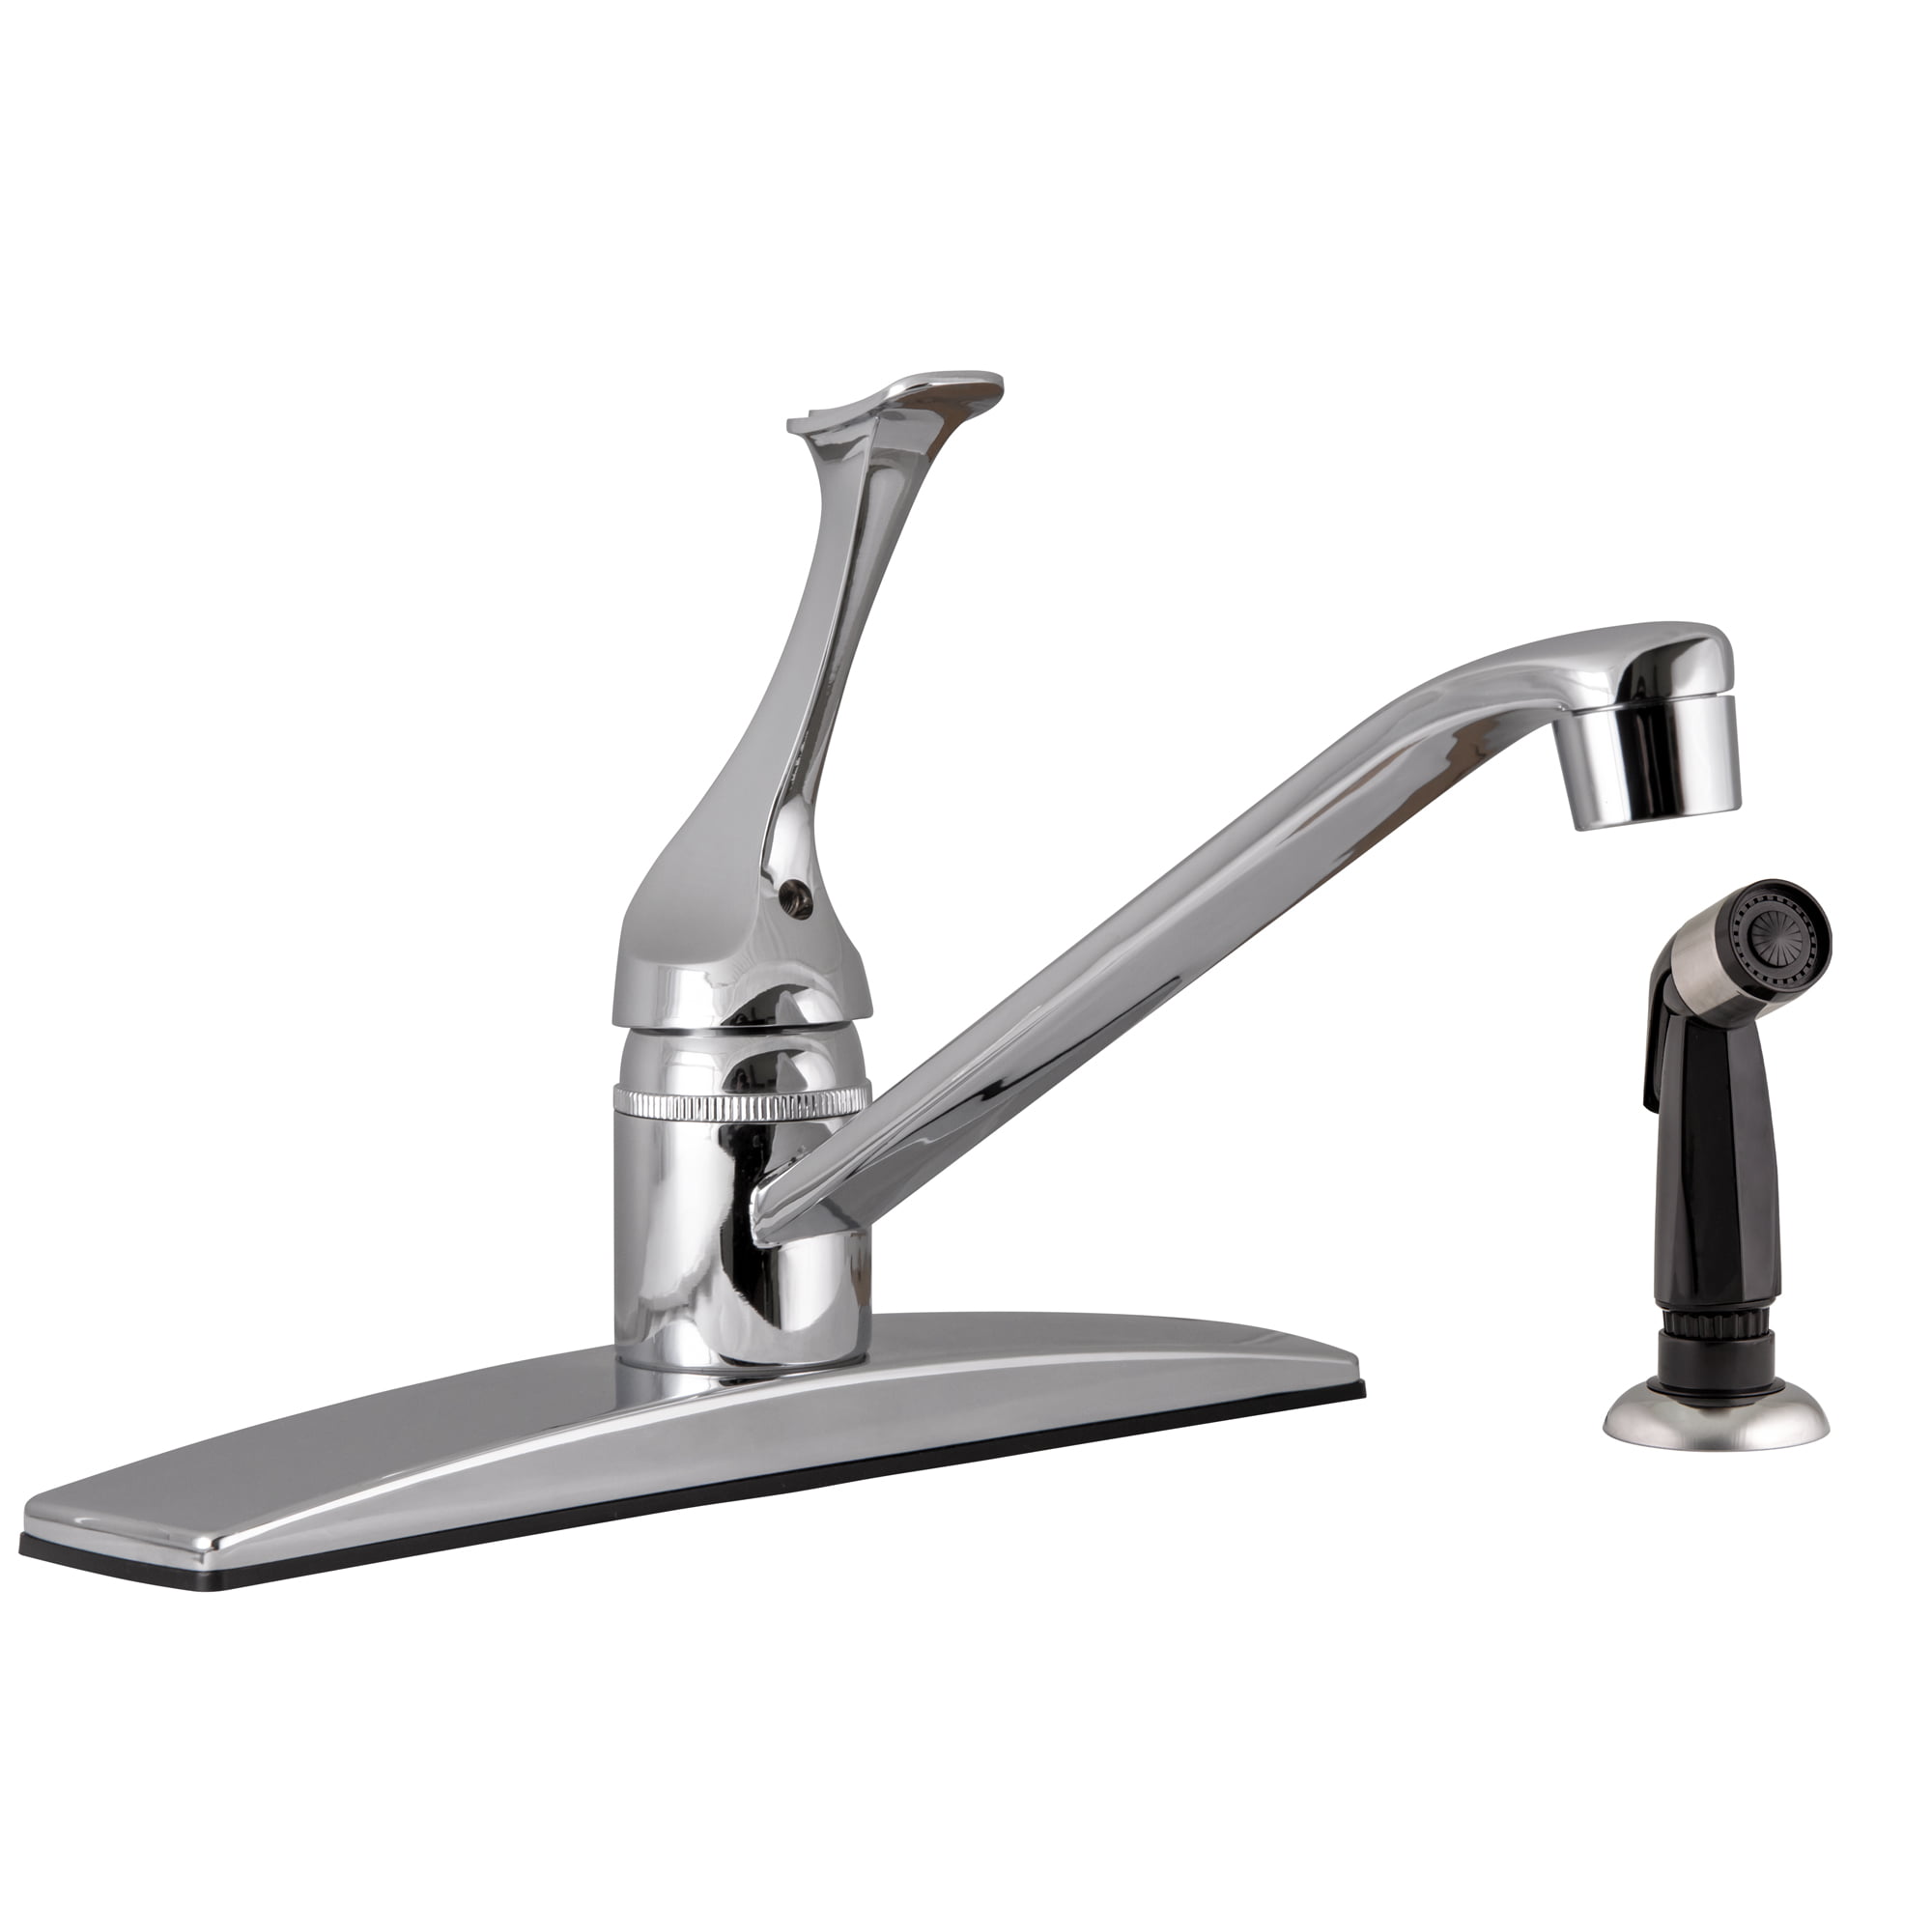 Ultra Faucets UF08015 Single Handle Chrome Non-metallic Series Kitchen Faucet for sale online 